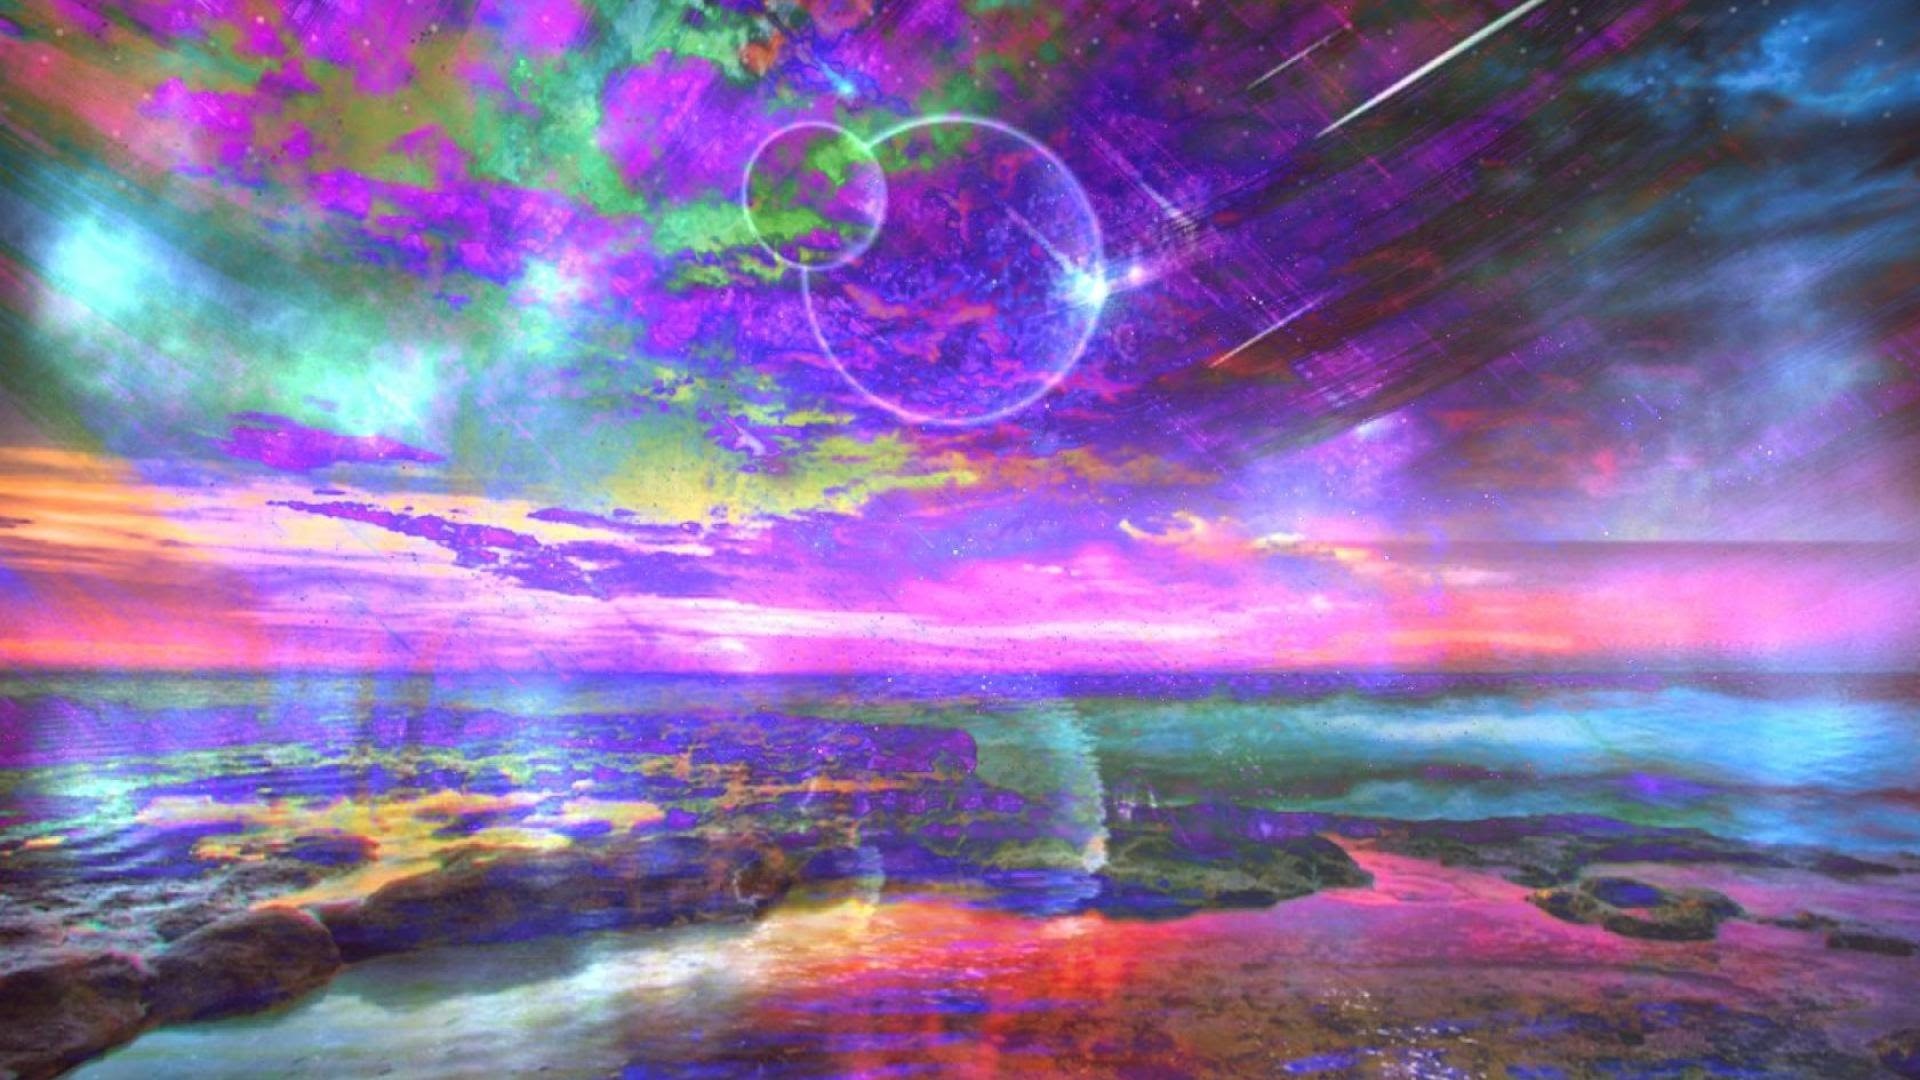 1920x1080 500+) Trippy Wallpapers amp Psychedelic Backgrounds HD [NEW] - HD Wallpapers